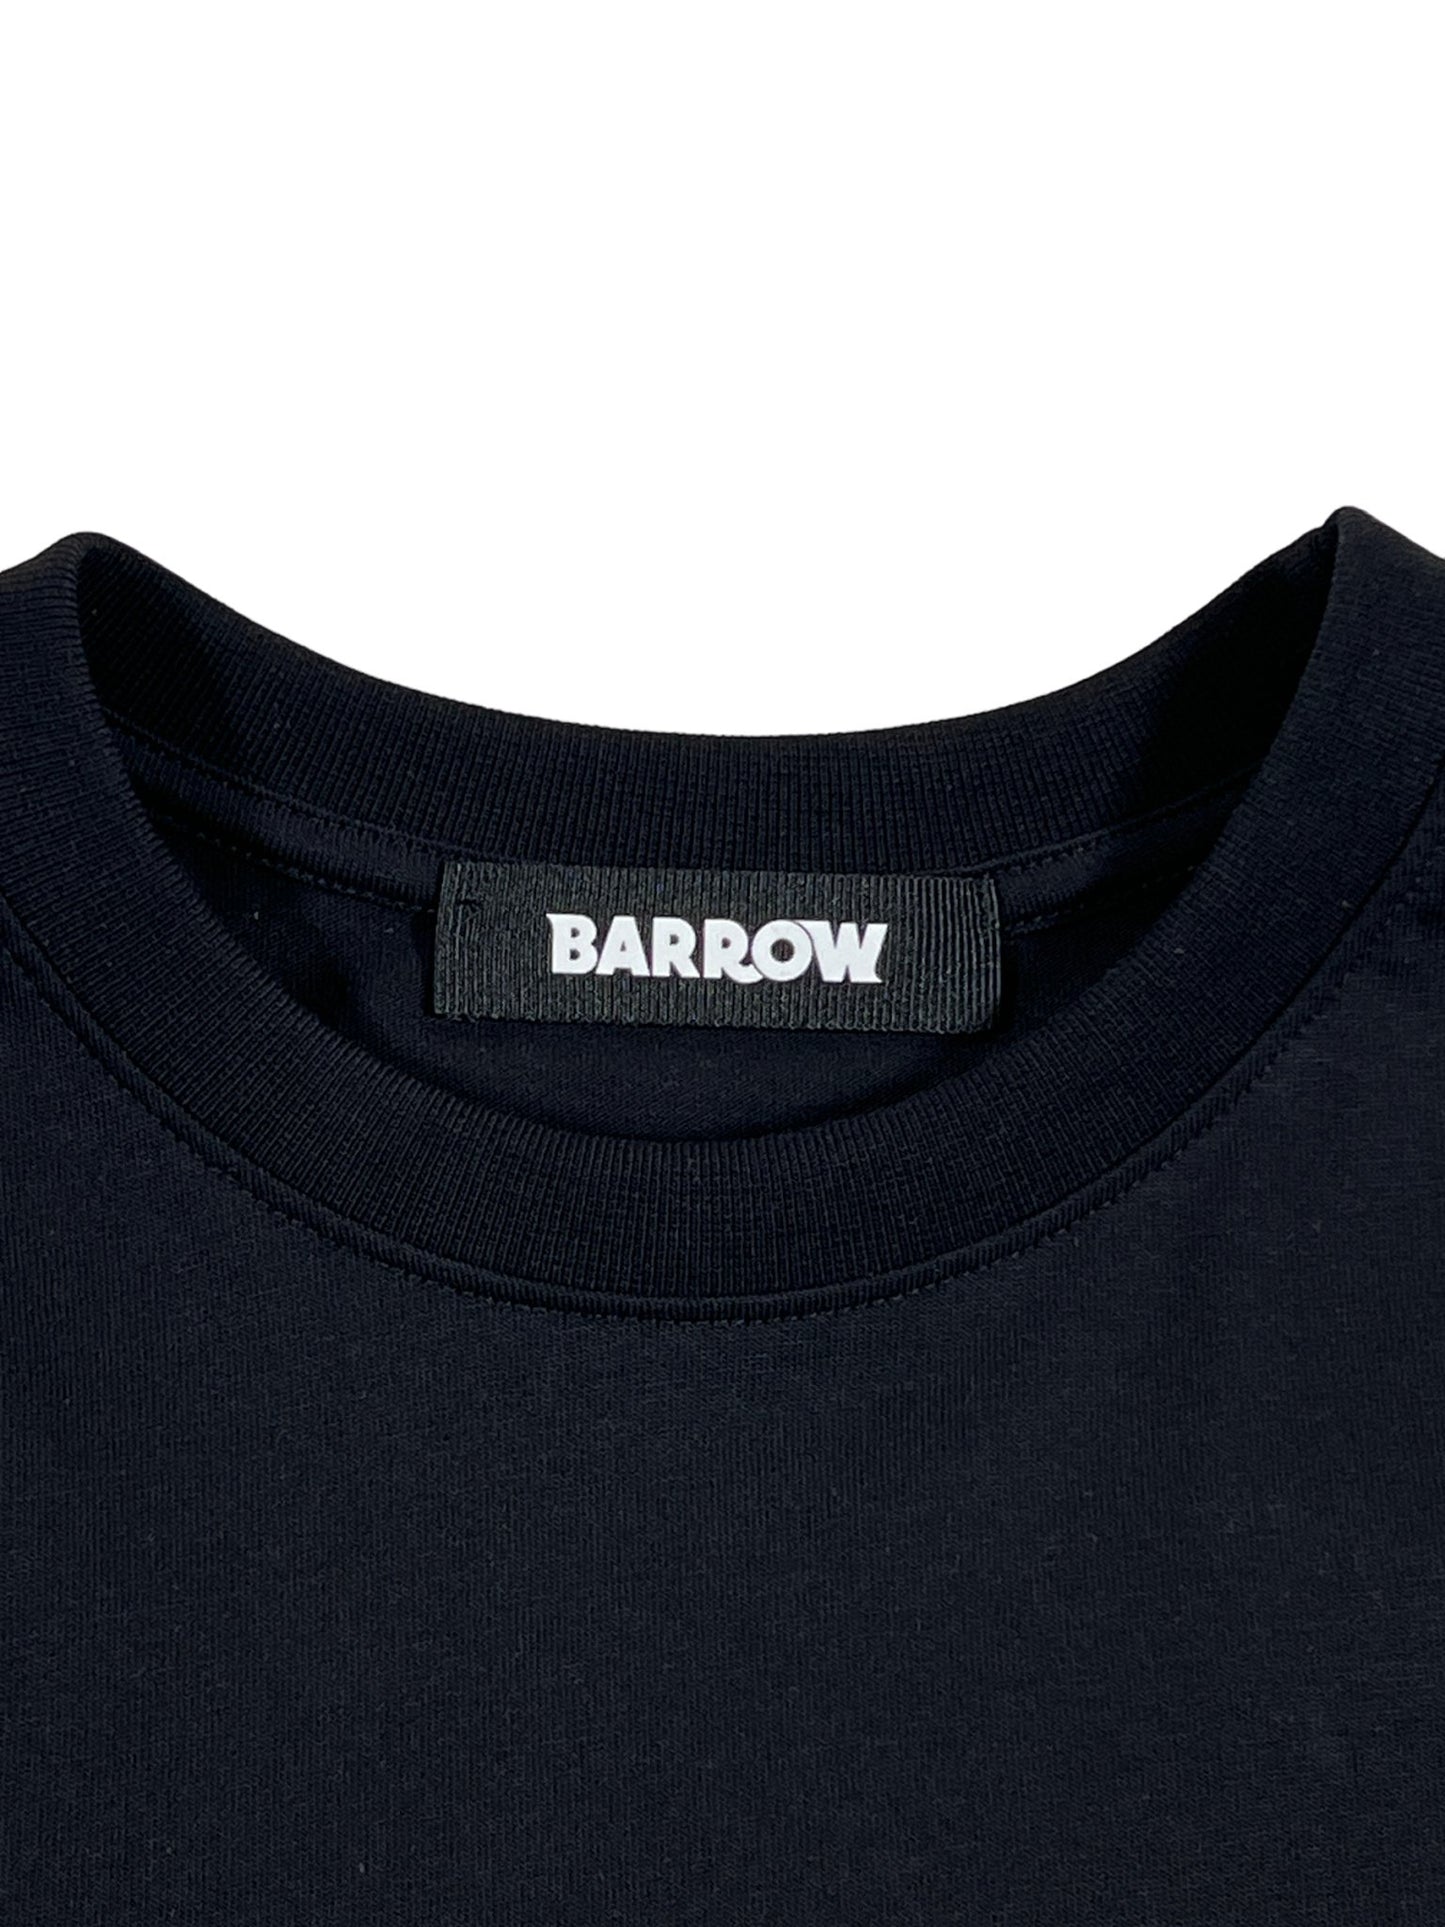 Close-up of a navy blue, 100% Cotton BARROW S4BWUATH036 JERSEY T-SHIRT UNISEX neckline with a brand label reading "BARROW.